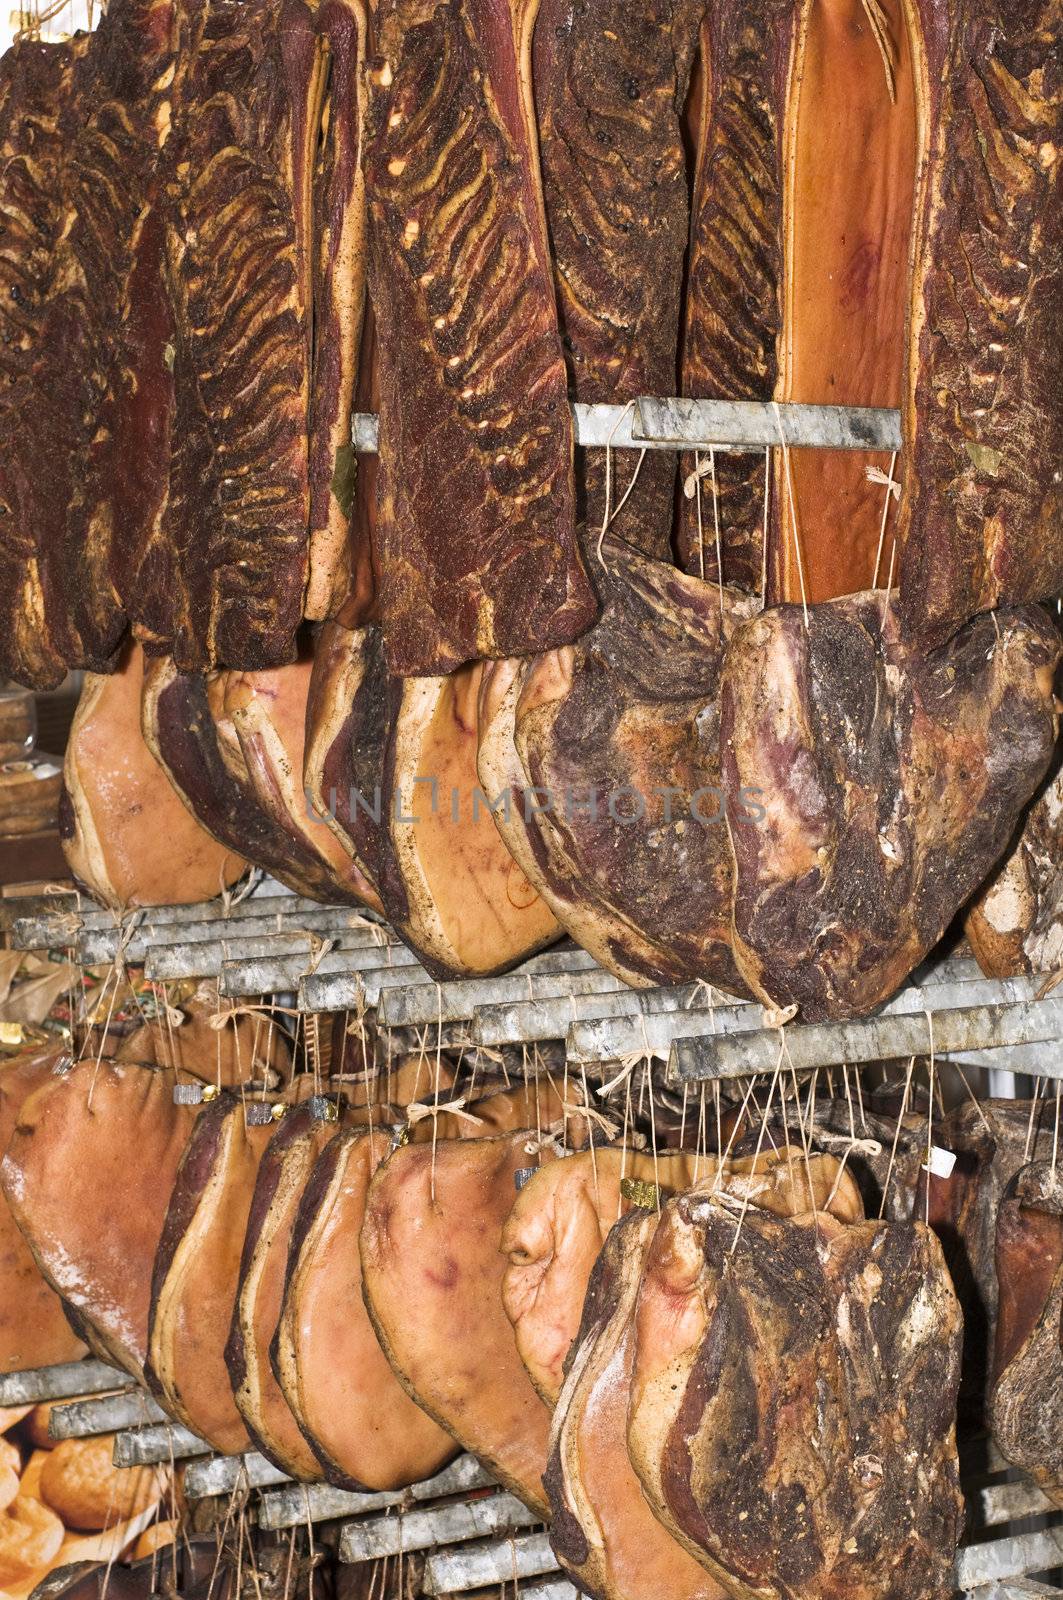 Hanged speck (salted and smocked ham) pieces drying up in a maturing storeroom.